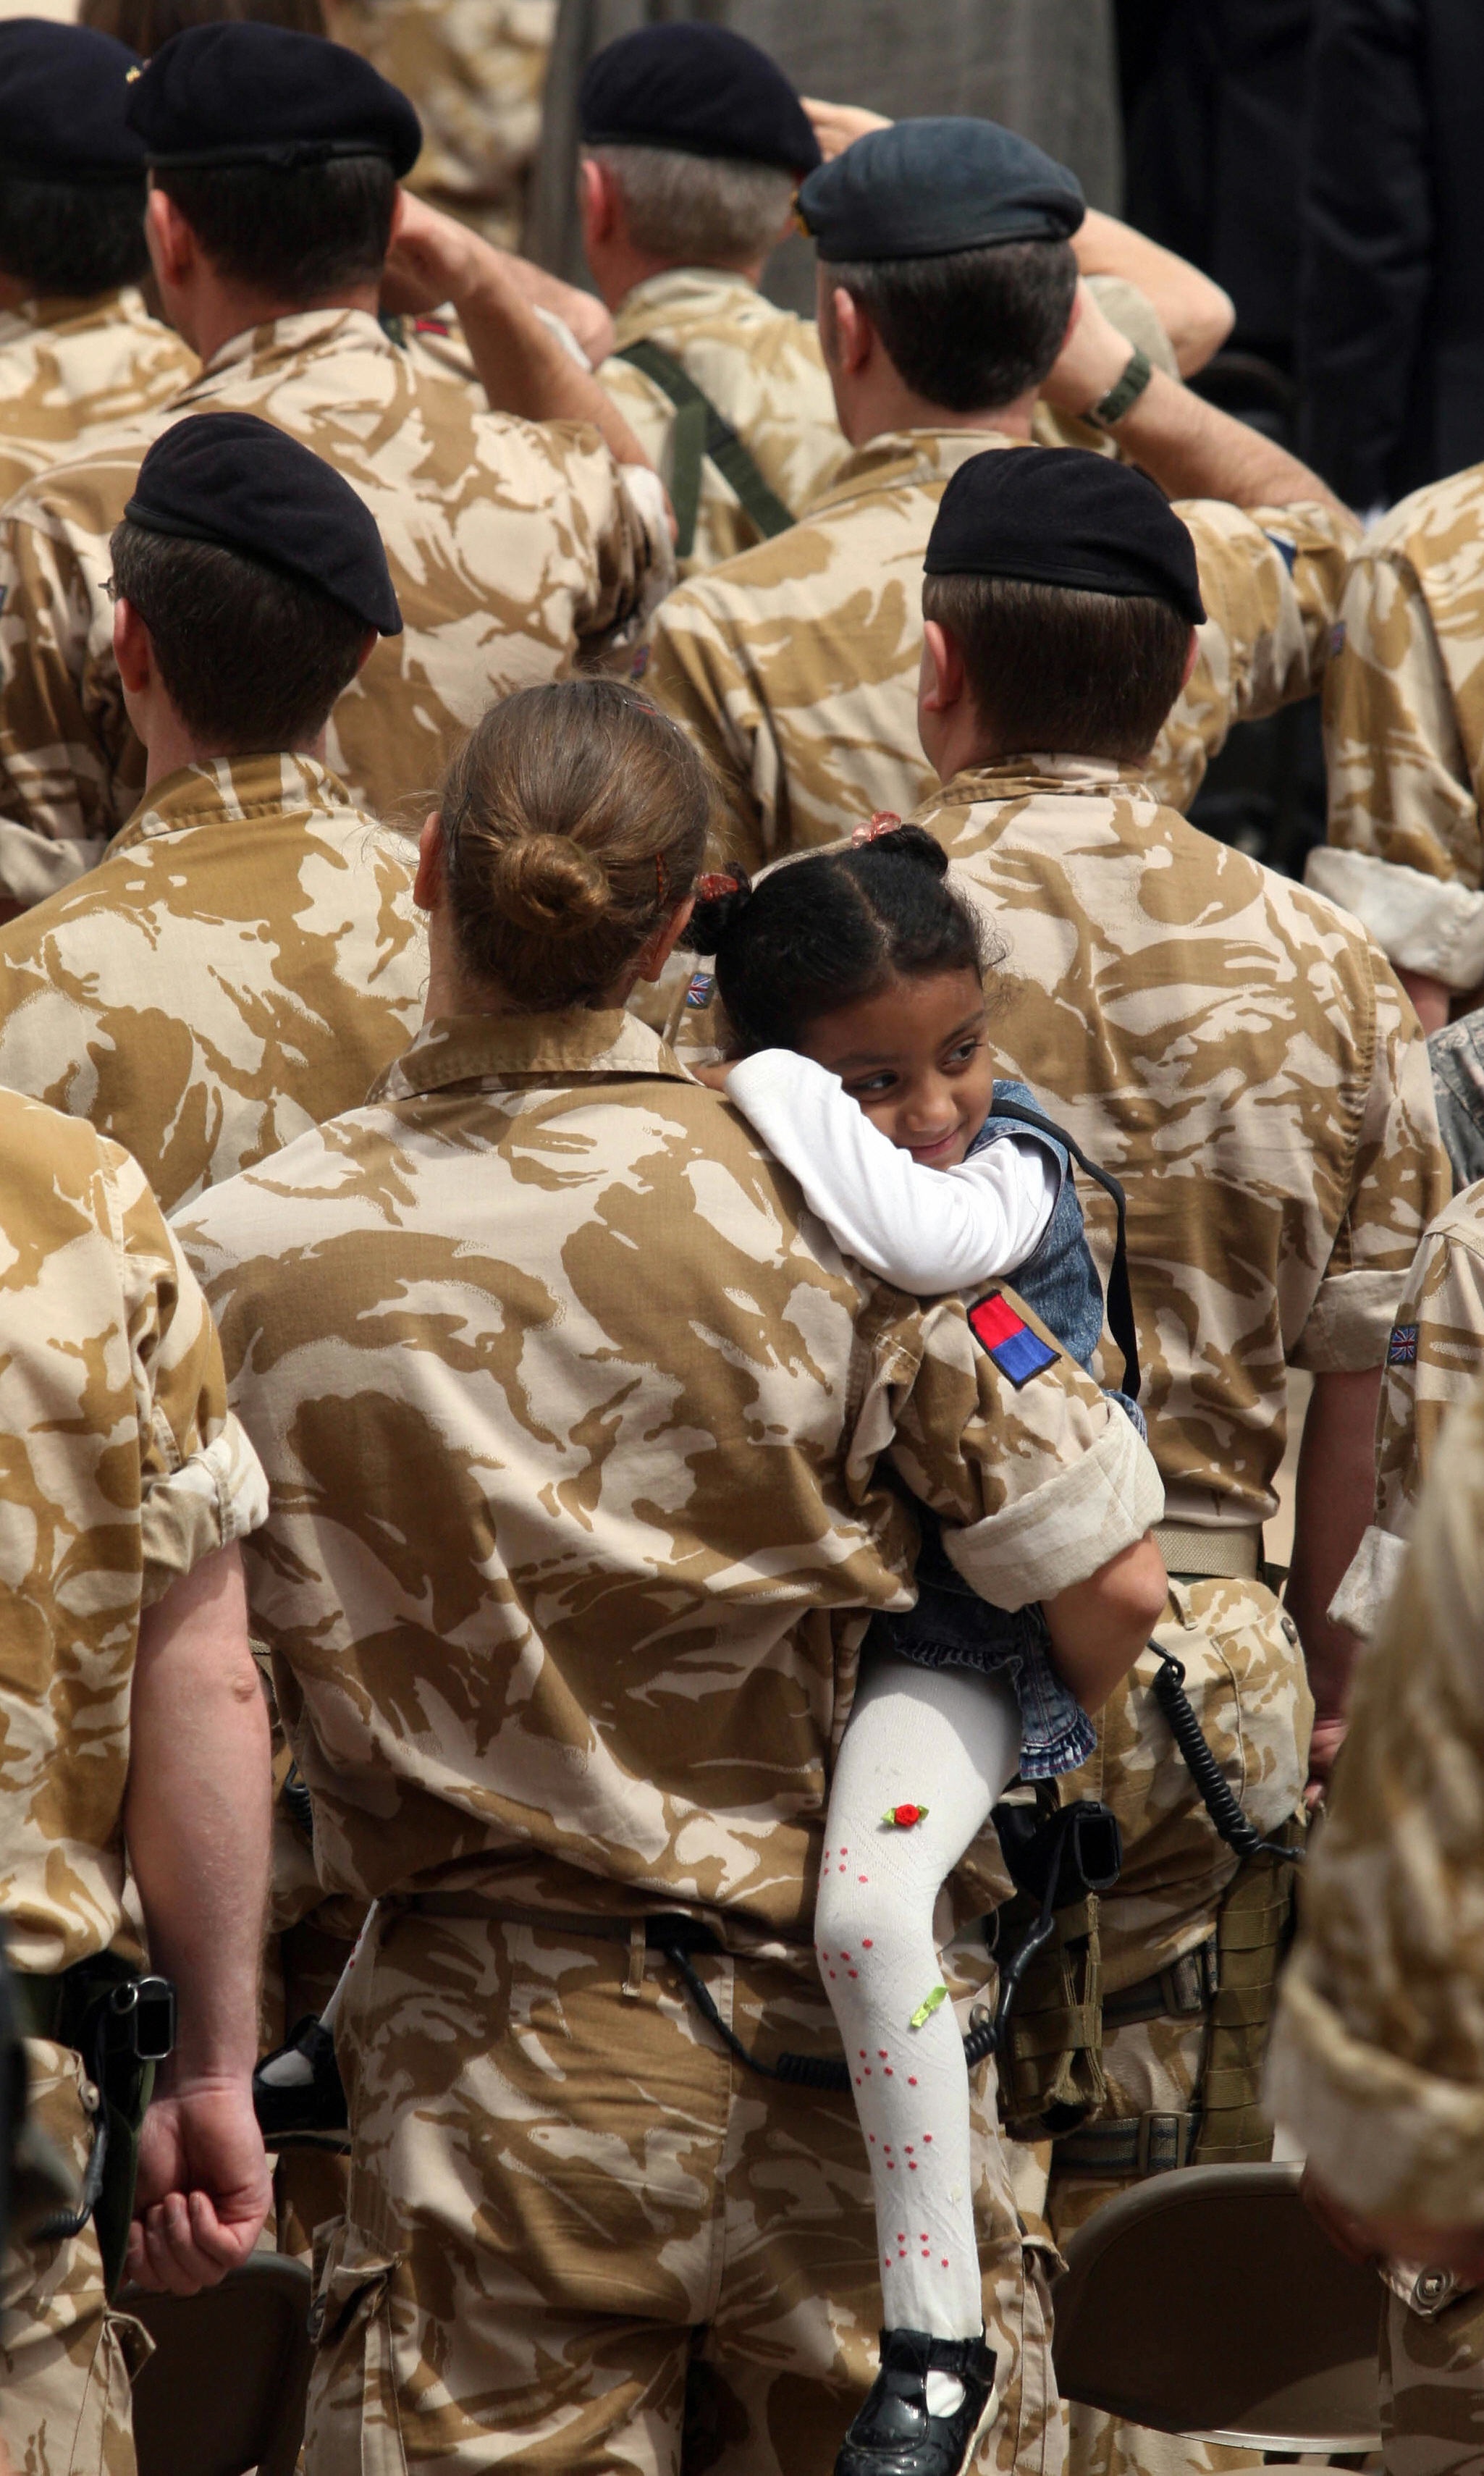 ESSAM AL-SUDANI/AFP/Getty Images. A British military woman holds an Iraqi girl while attending a handover ceremony marking the pullout of the British army from Iraq at Basra airport on March 31, 2009.